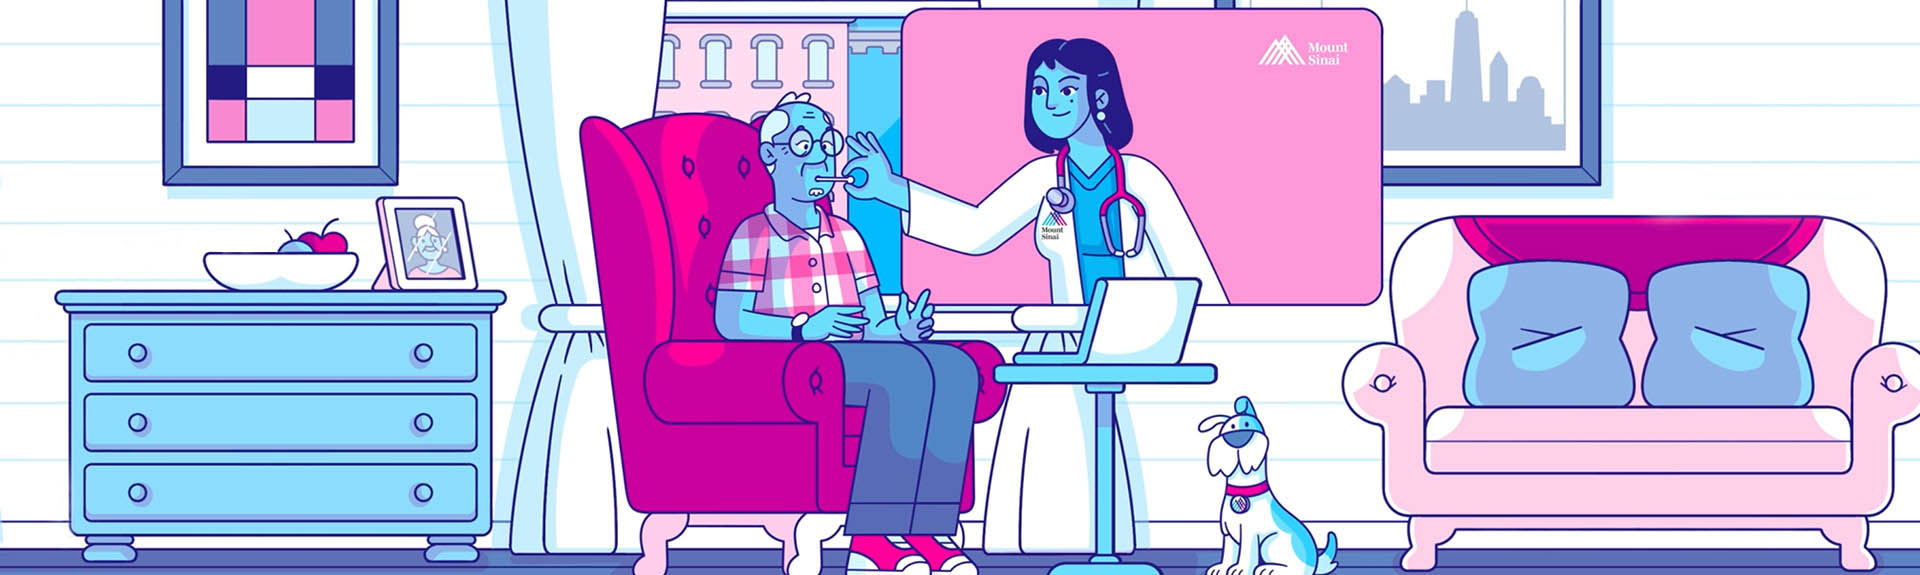 Illustration of doctor taking patient’s temperature from a video screen